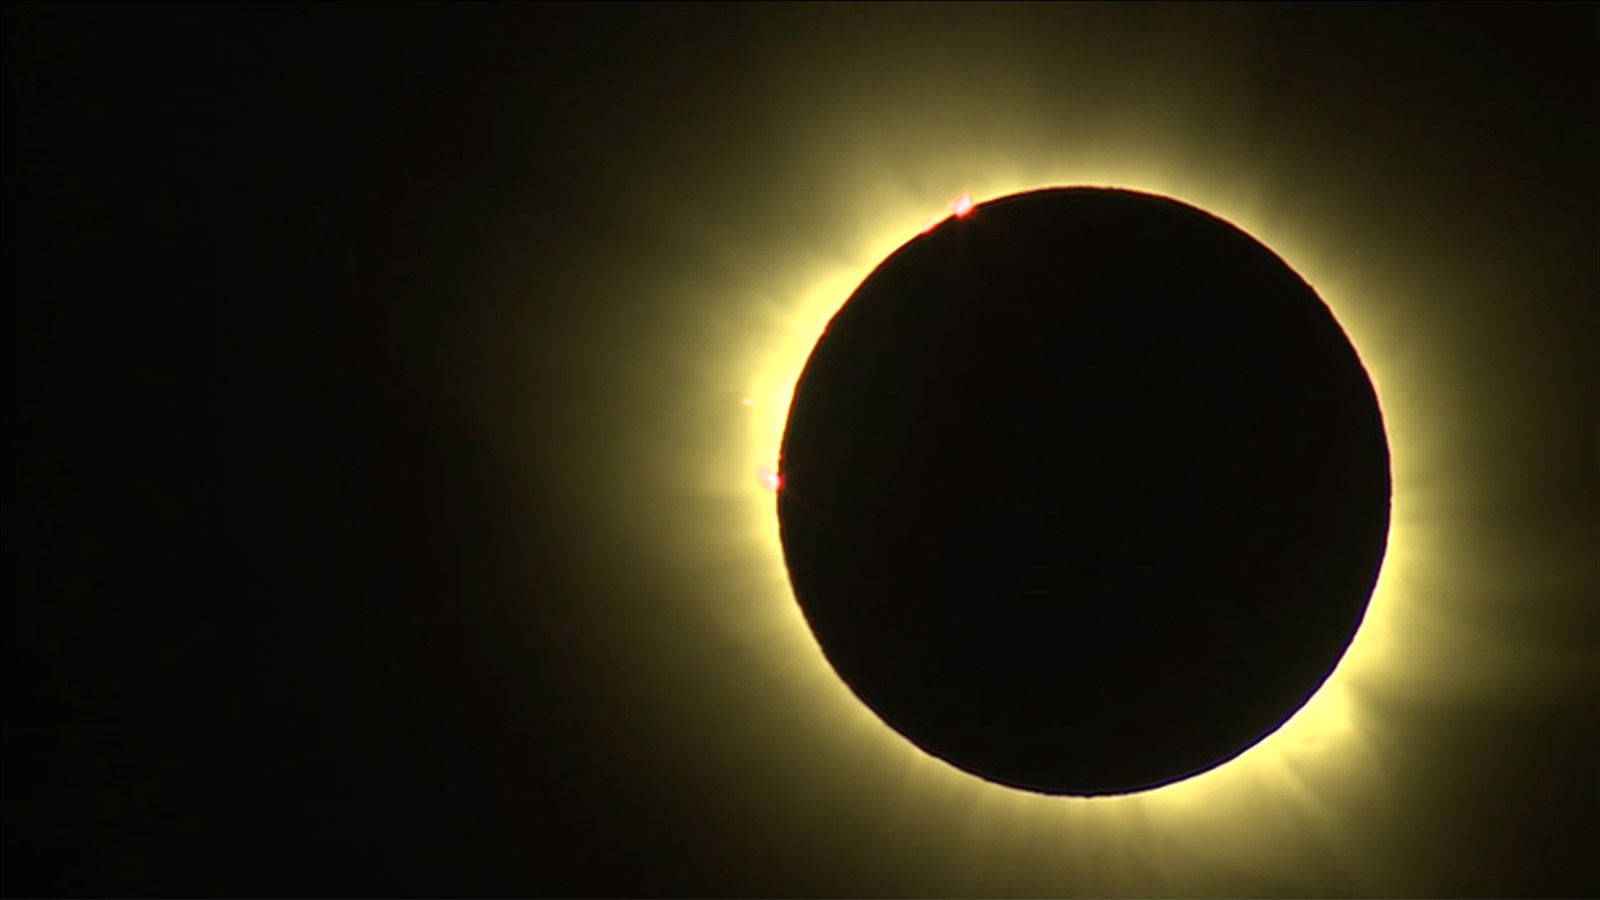 Total Solar Eclipse of 2015 in Amazing Photo